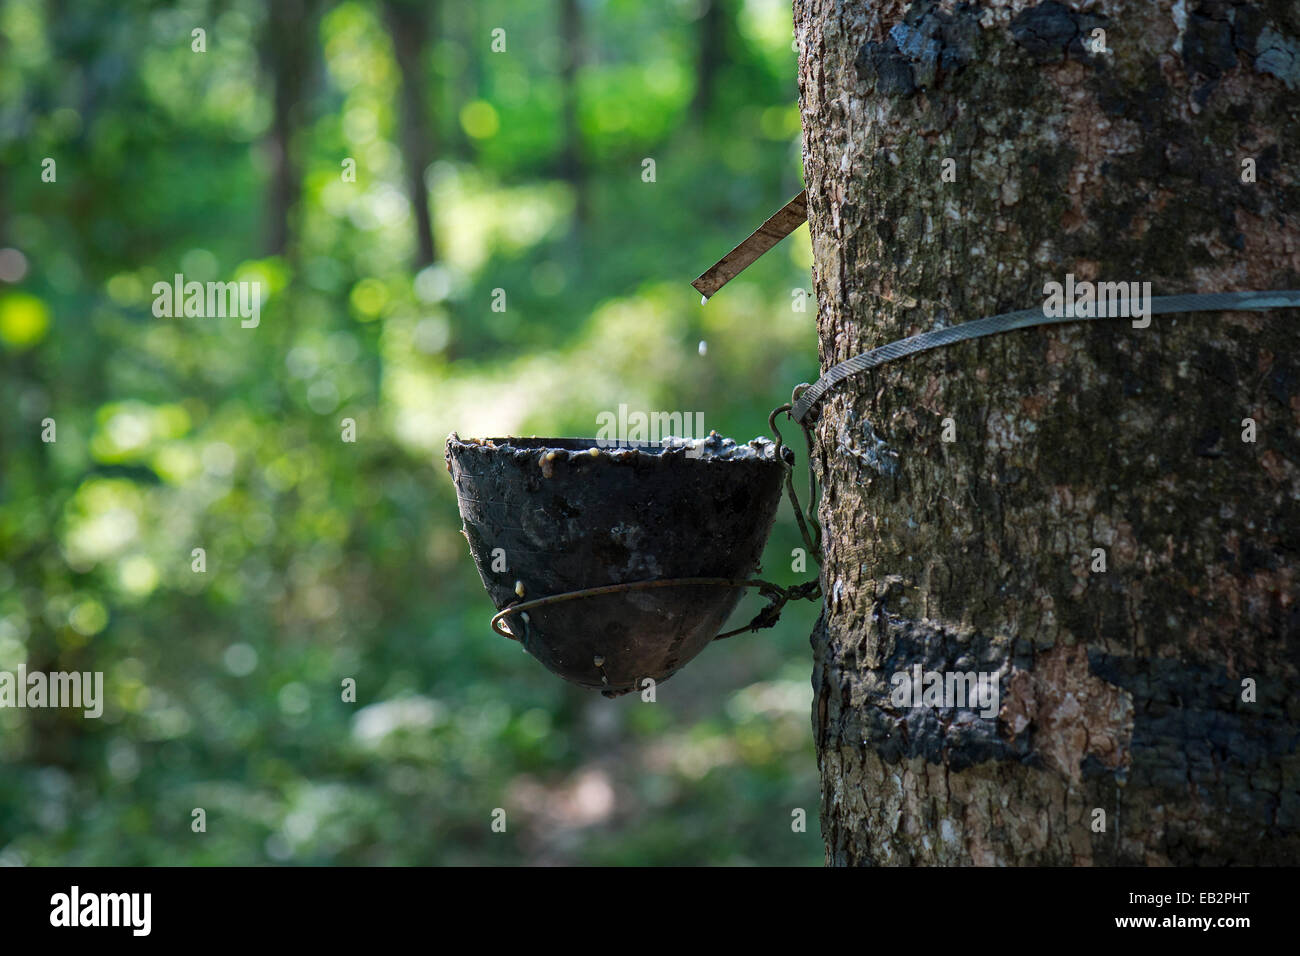 Rubber Tree (Hevea brasiliensis) with collecting vessel, natural rubber production on a plantation, Peermade, Kerala, India Stock Photo